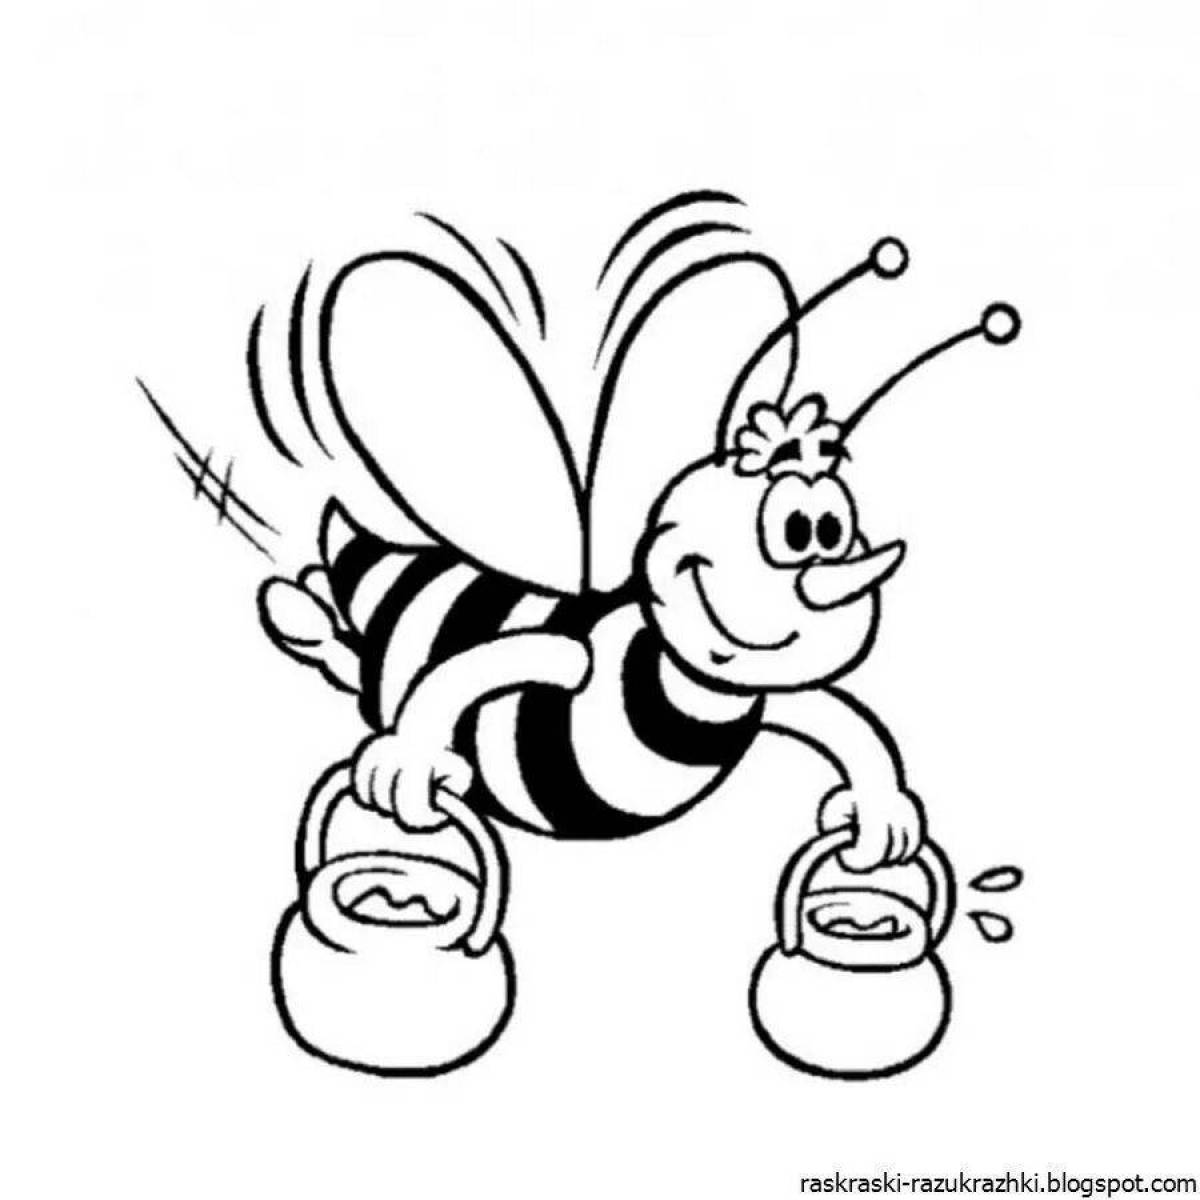 Playful drawing of a bee